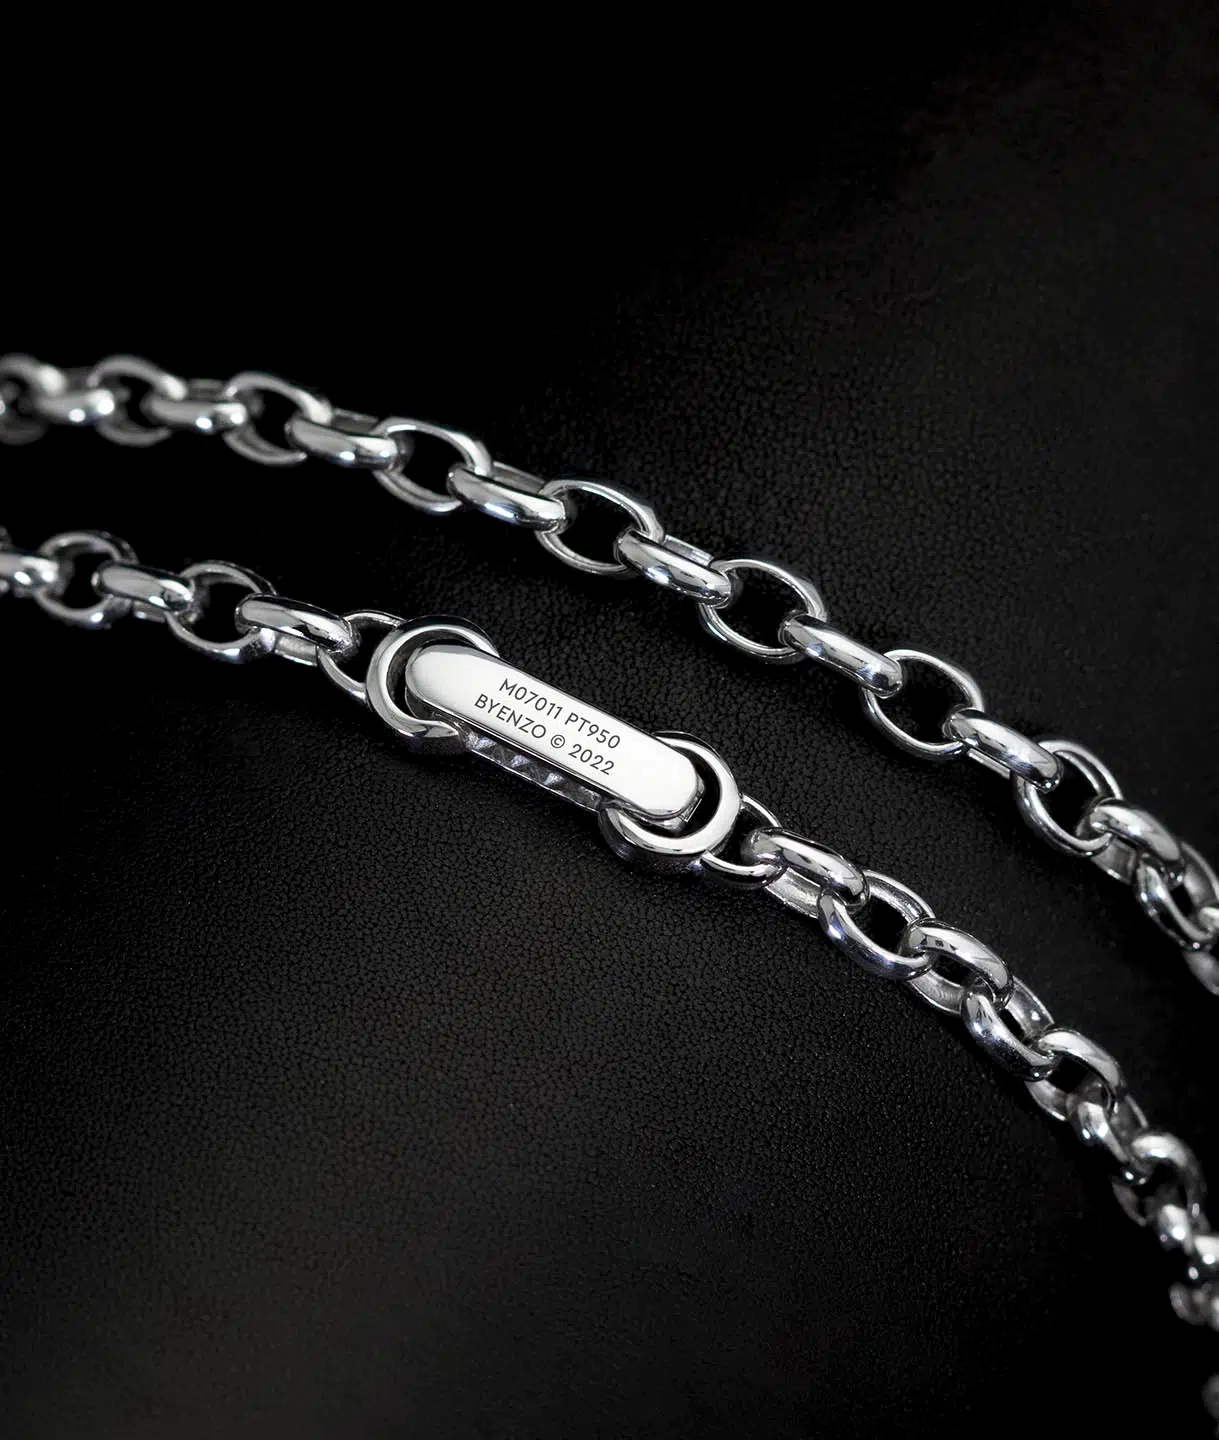 A clasp of a men's platinum rolo link chain necklace designed by ByEnzo Jewelry with engraving on the back of the chain